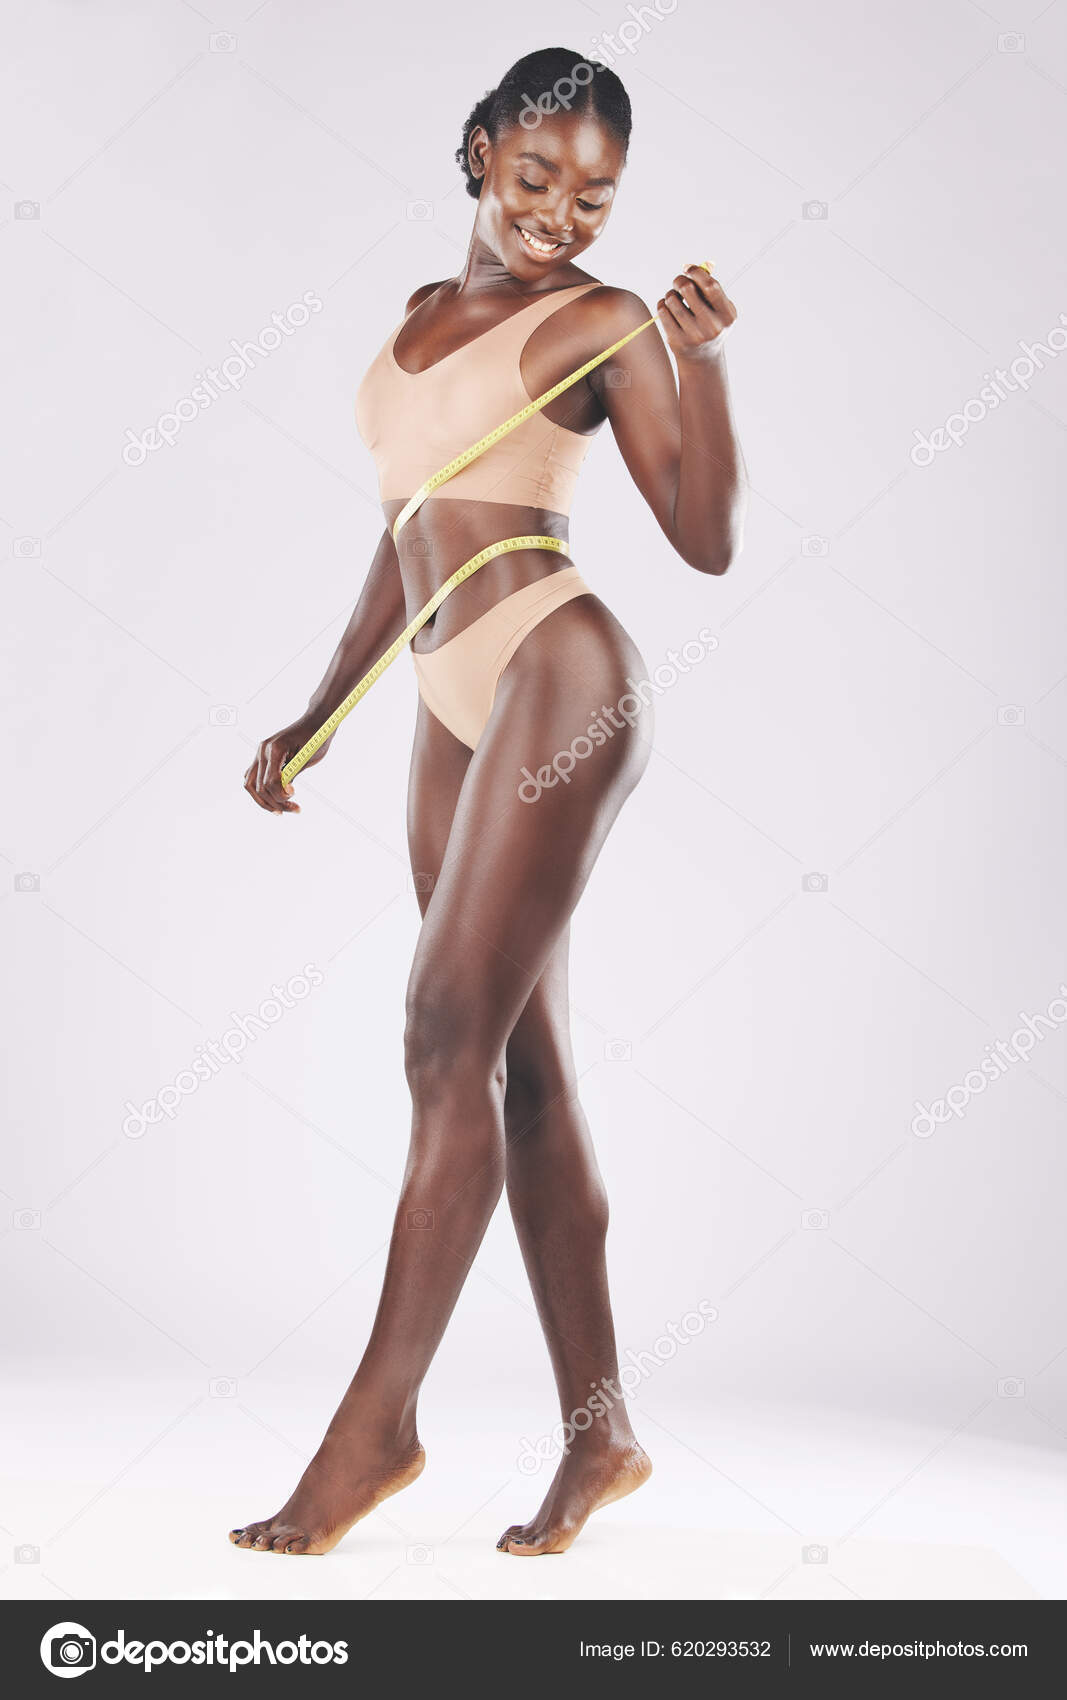 Fitness Lingerie Black Woman Measuring Tape Studio Weight Loss